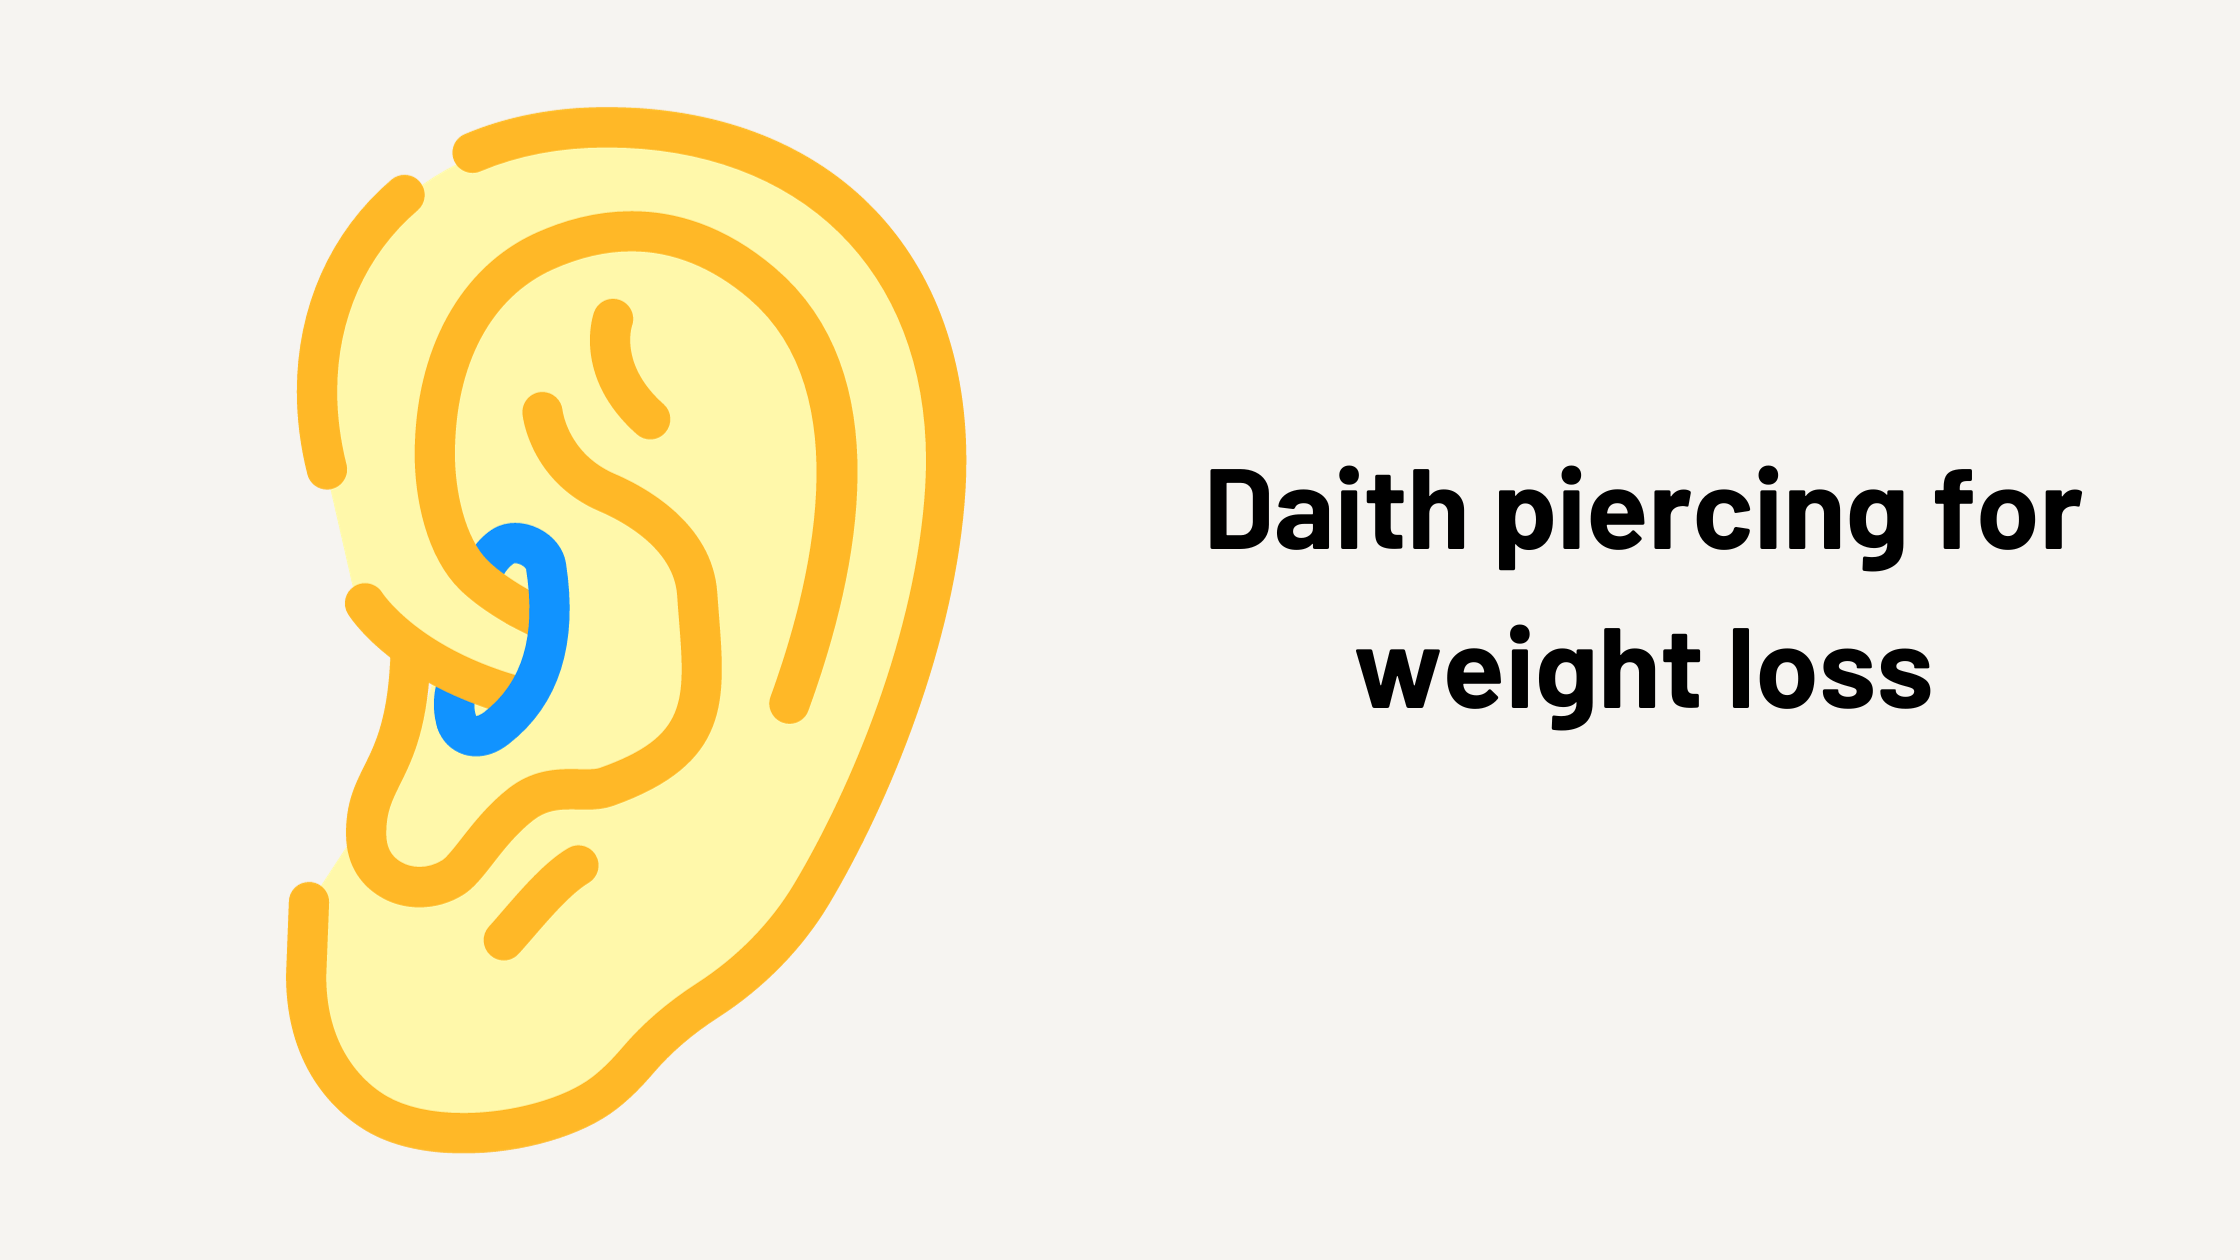 Daith piercing for weight loss